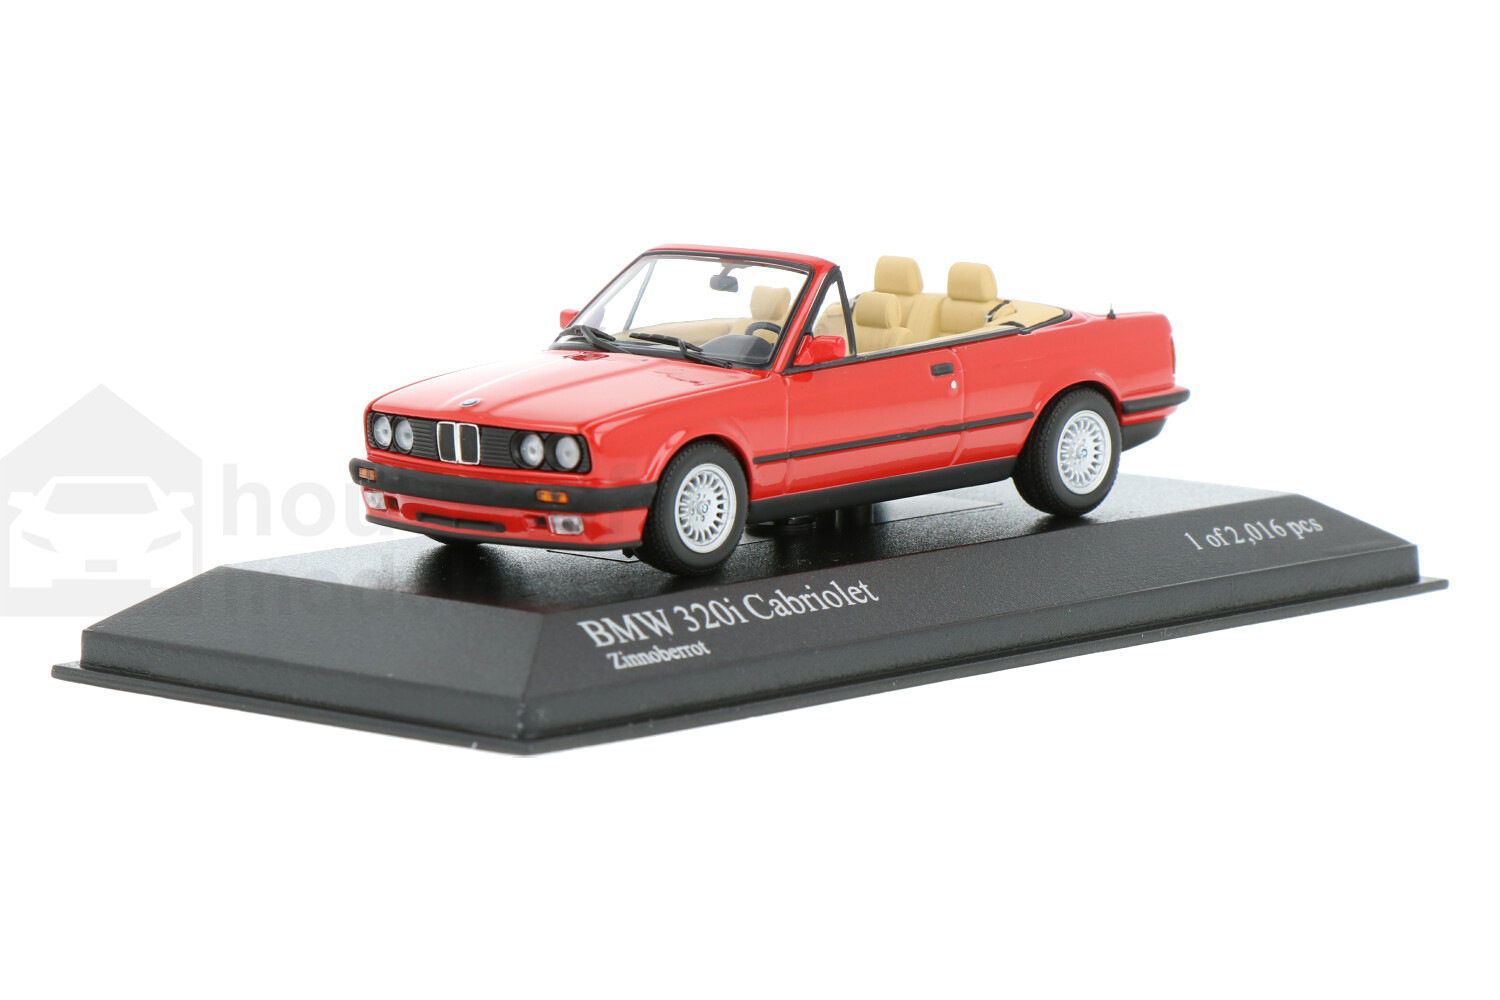 BMW-3-Series-Cabriolet-431024030_13154012138076914-Minichamps_Houseofmodelcars_.jpg